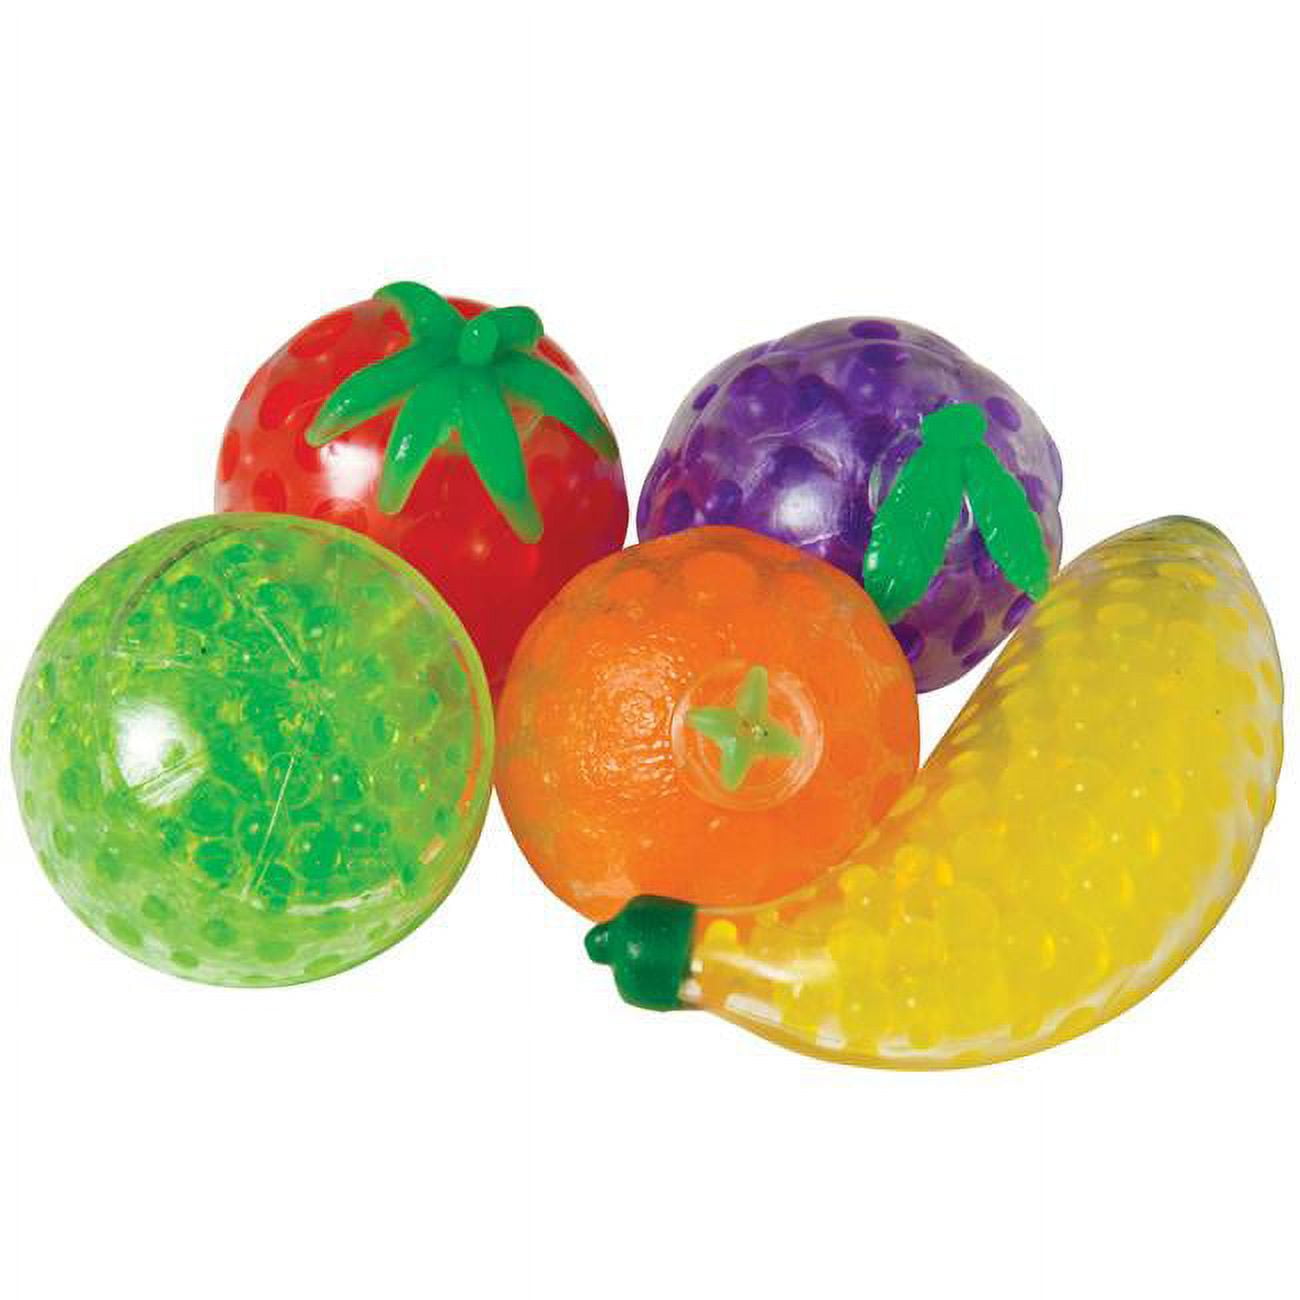 2316691 2 In. Dia. Fruity Beads Squish Ball - 12 Count - Case Of 12